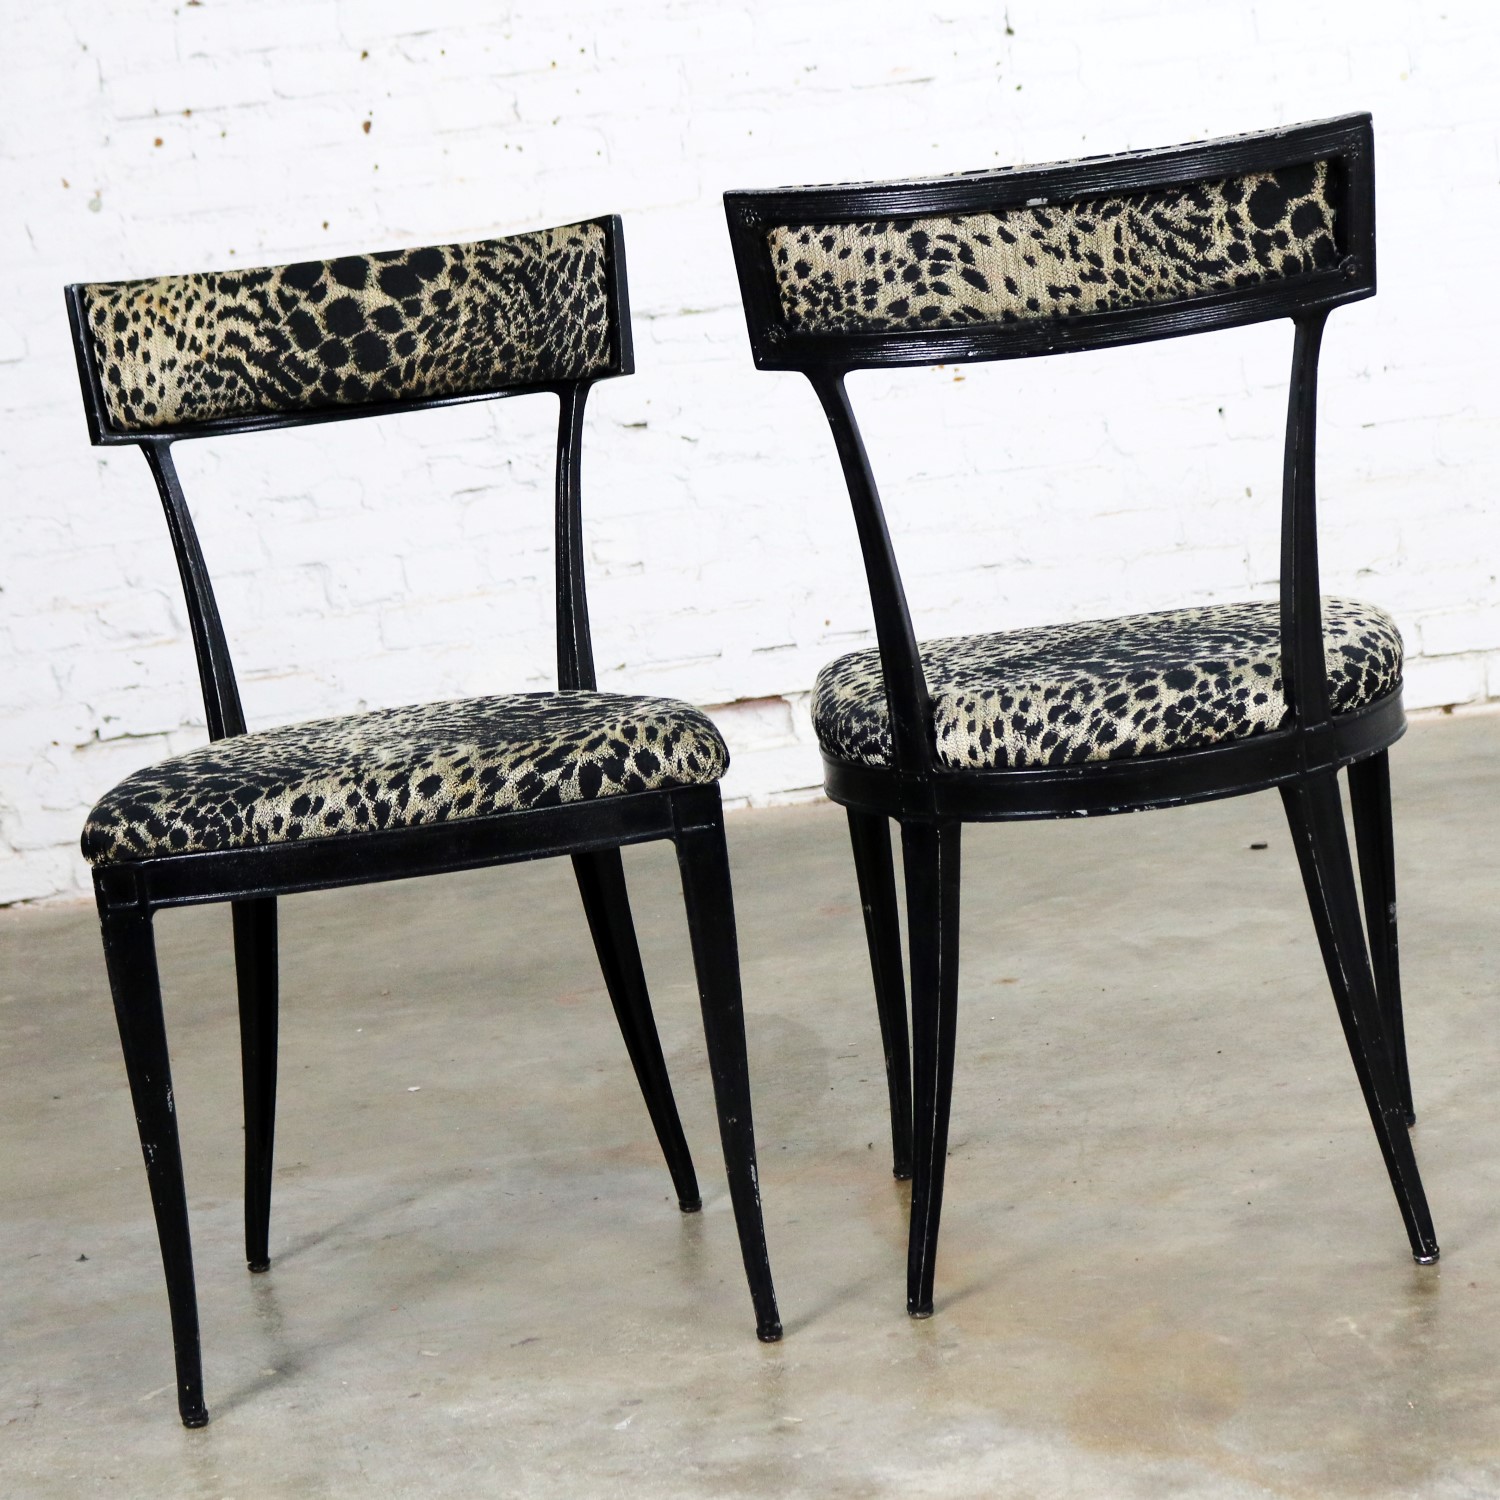 Pair Black Art Deco and Animal Print Side Chairs Cast Aluminum by Crucible Products Corp.